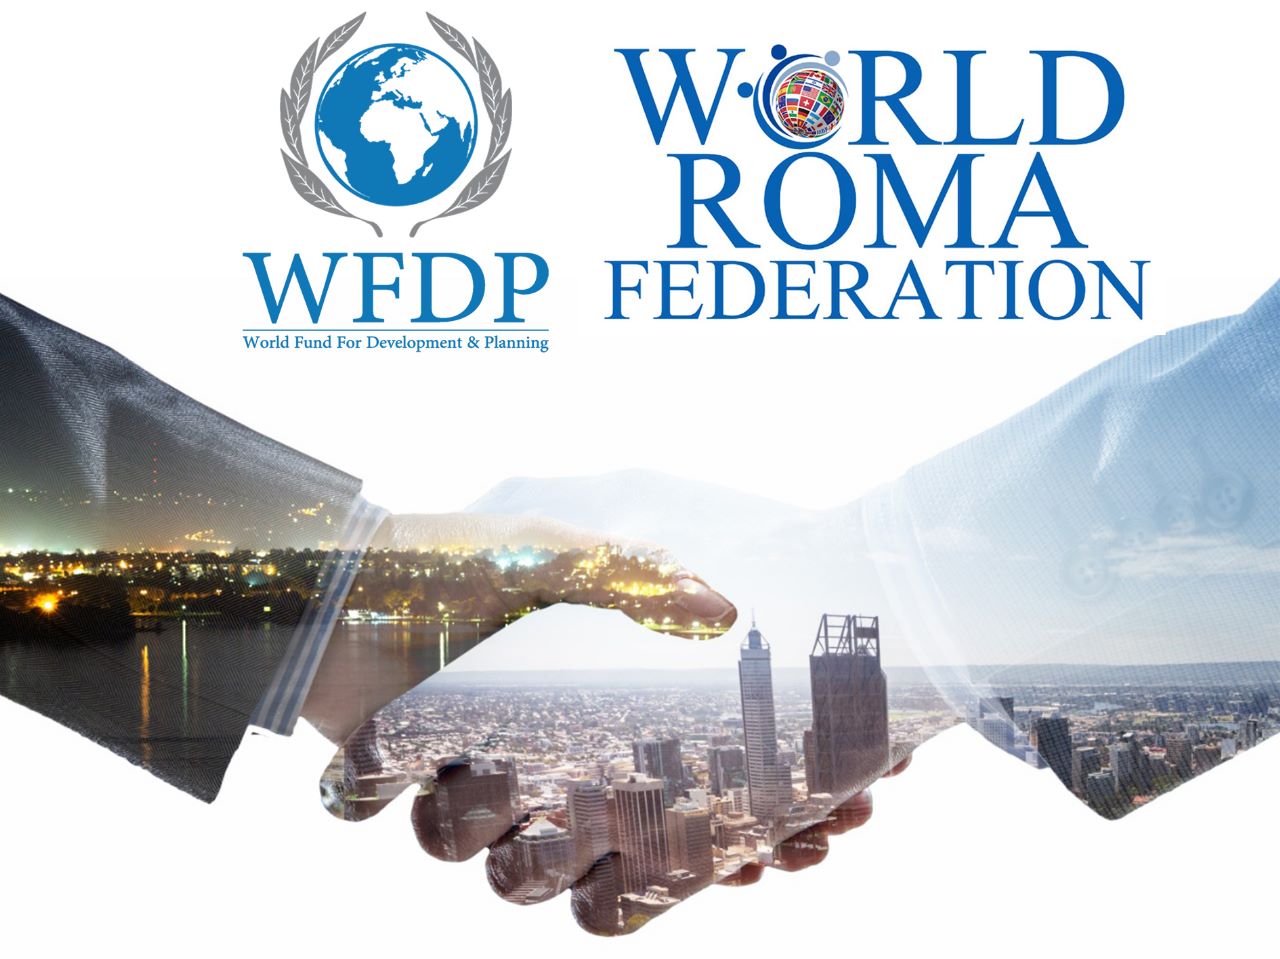 Cooperation agreement between WFDP and World Roma Federation to implement a special stakeholder's group within the UN System under the auspices of ECOSOC